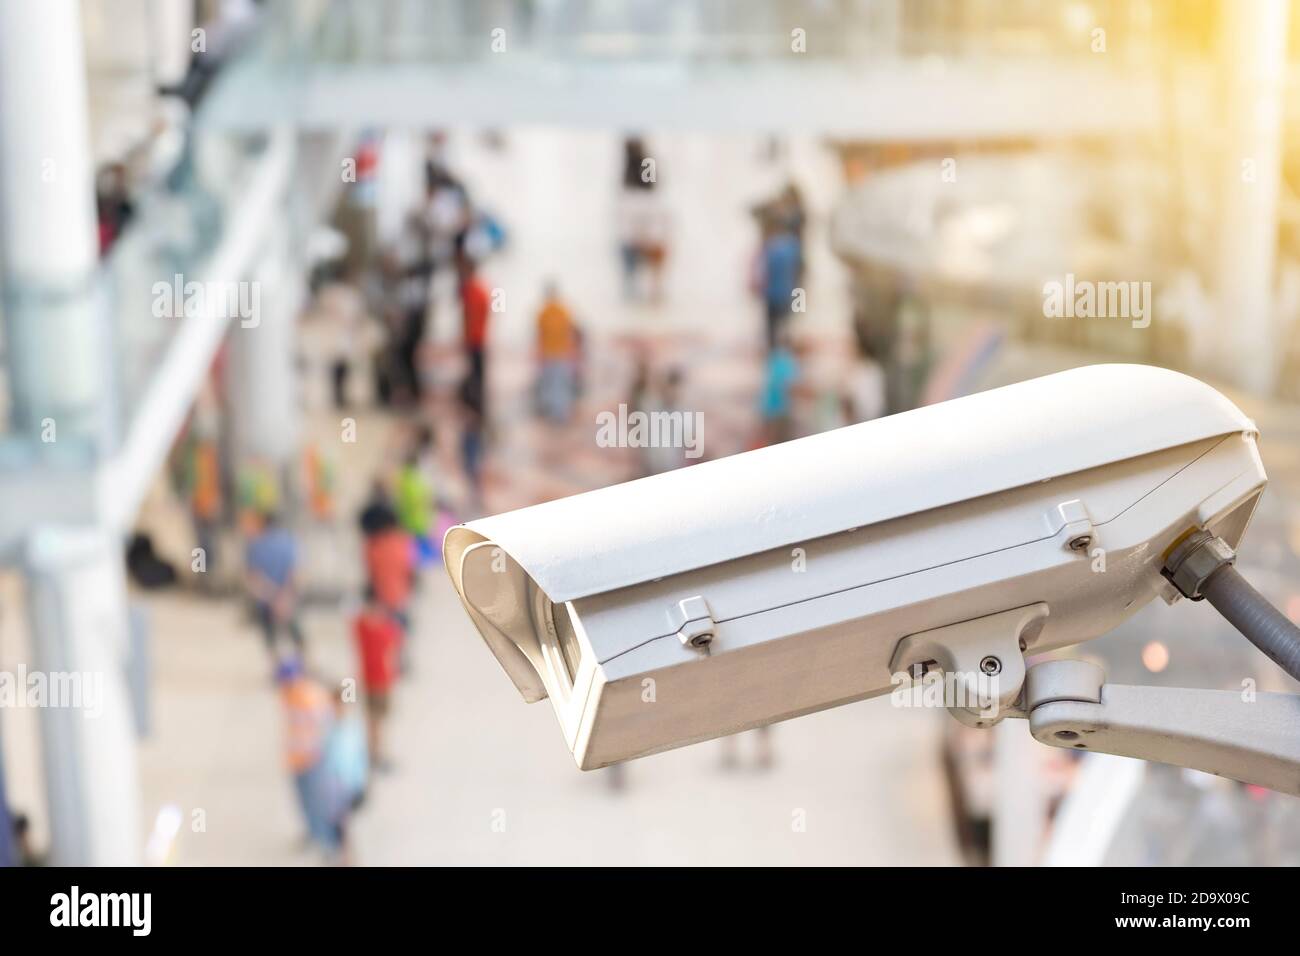 CCTV or surveillance camera recording inside the airport terminal to the various internal security. Stock Photo